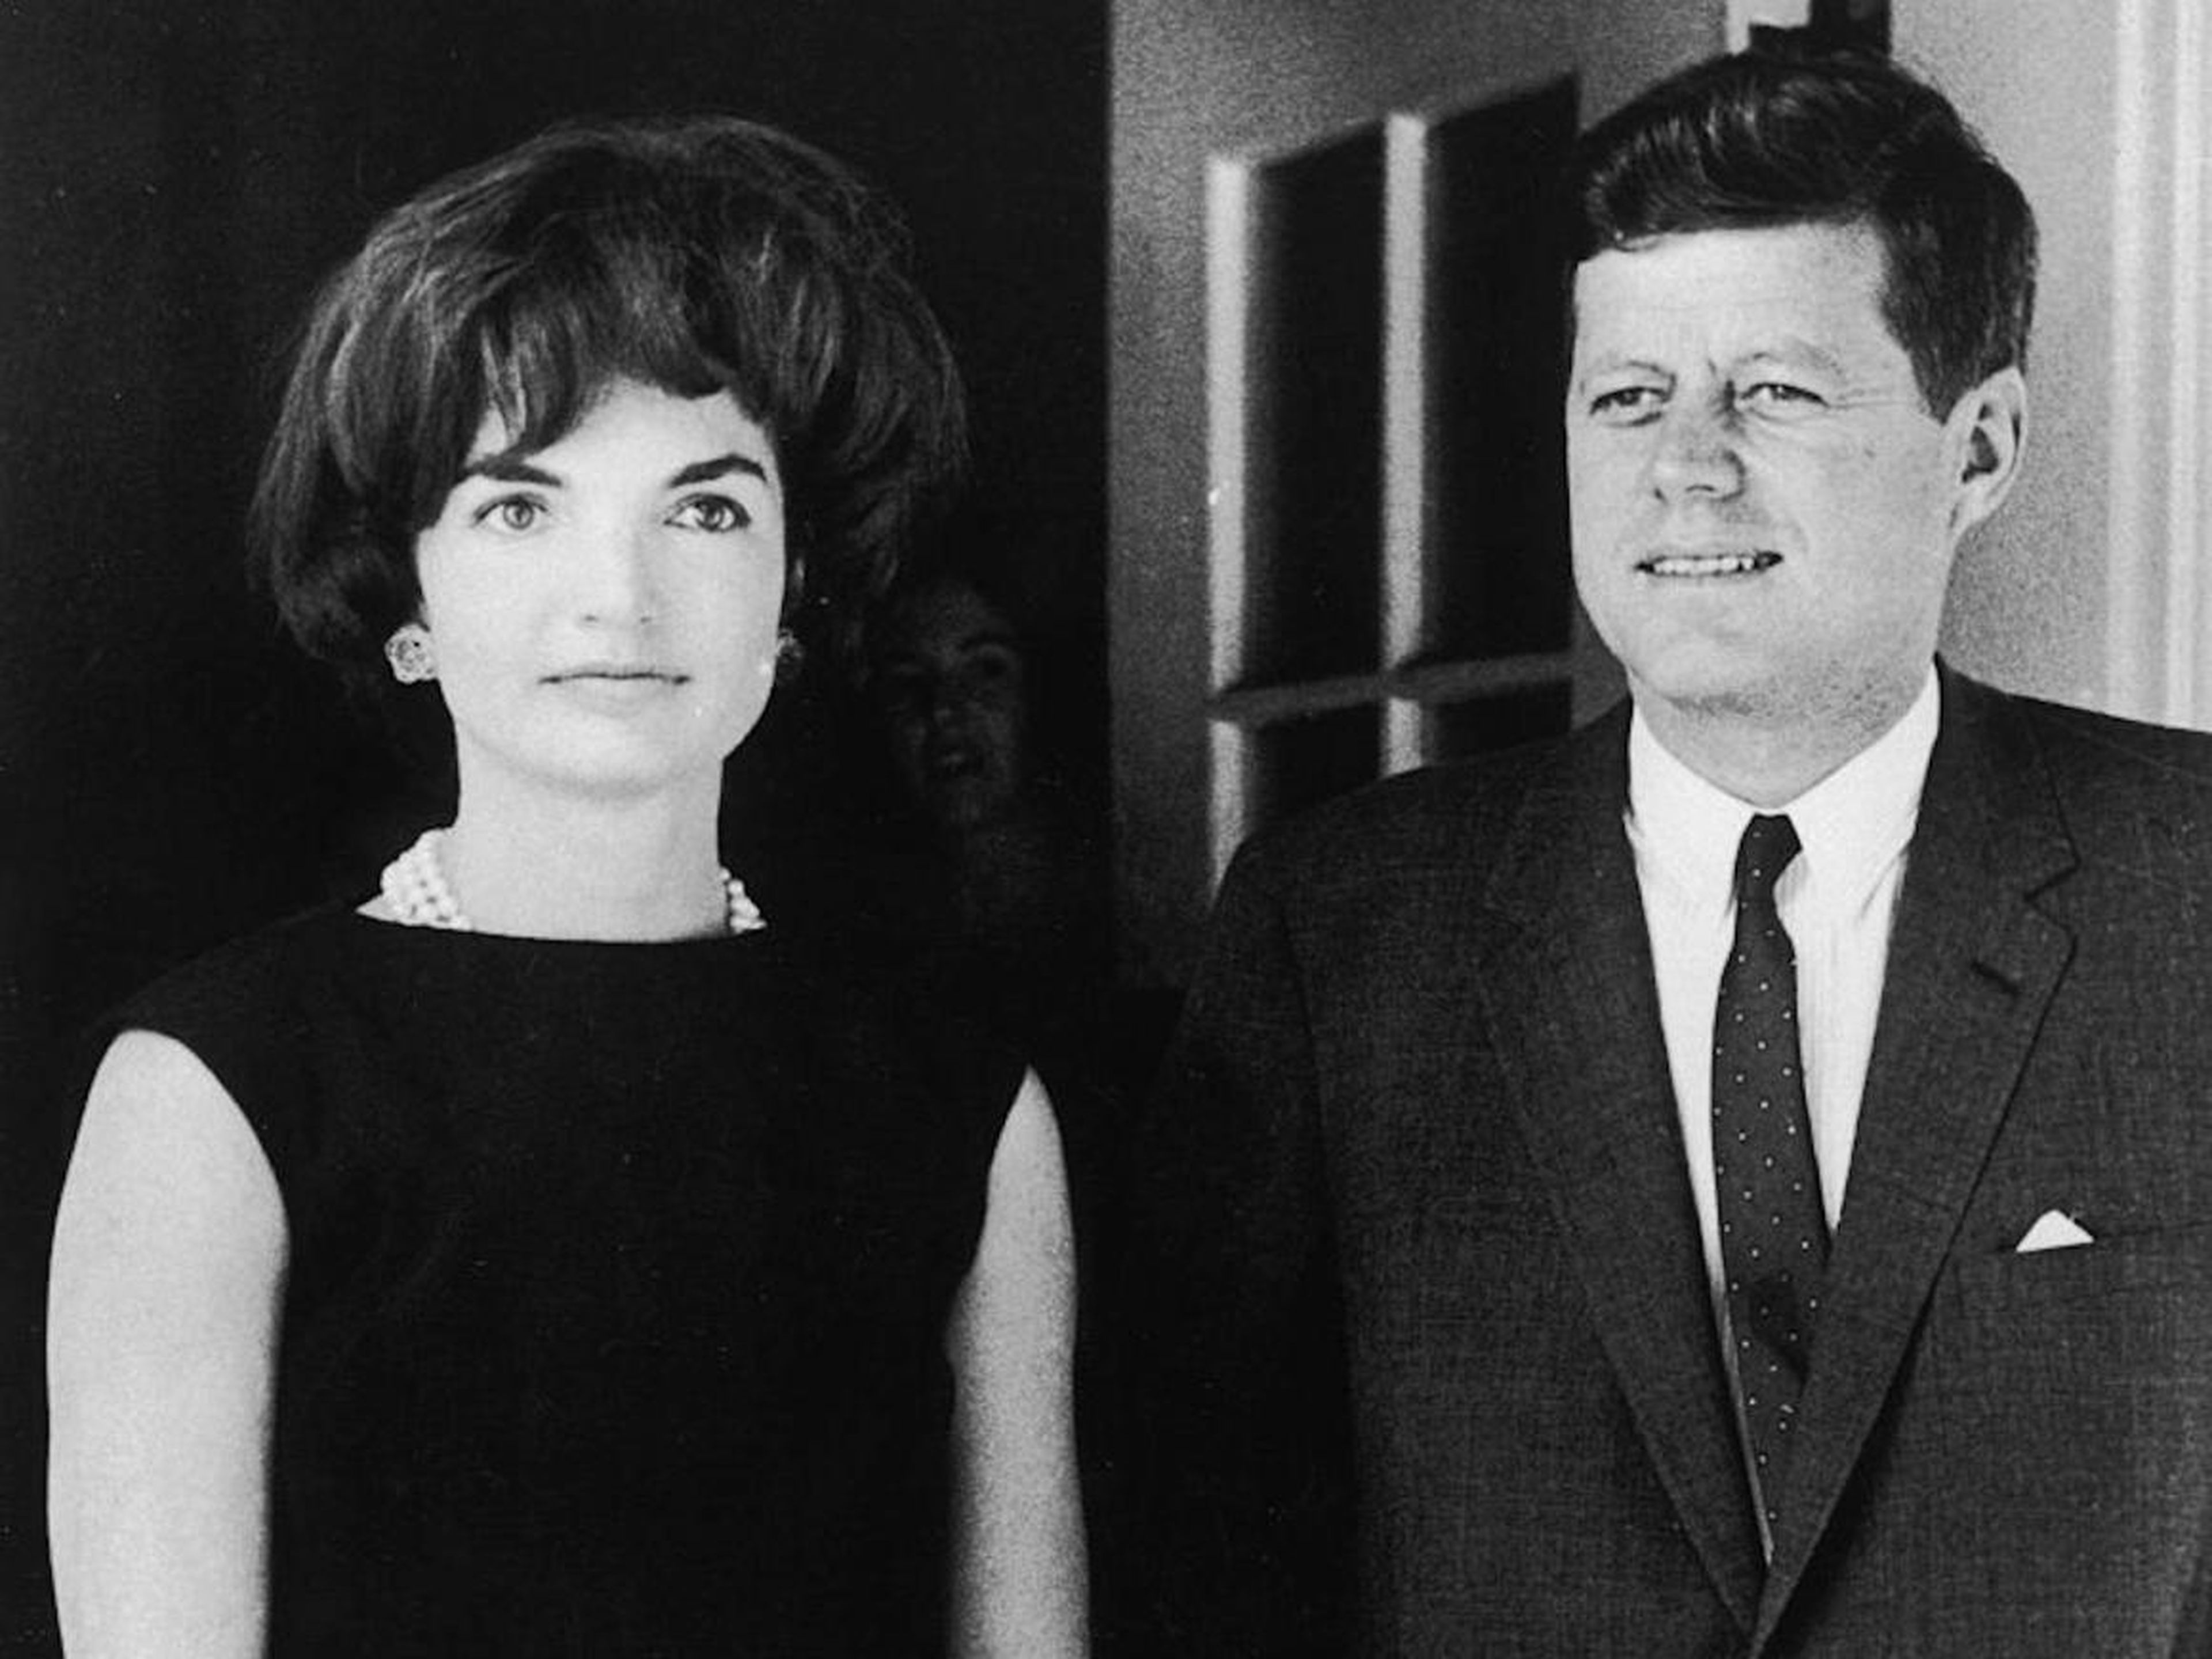 The beginning of the 1960s saw many Americans starting to take cues from the White House on how to dress. The Kennedy administration — with its preppy First Couple — ended up influencing the fashion of the time.